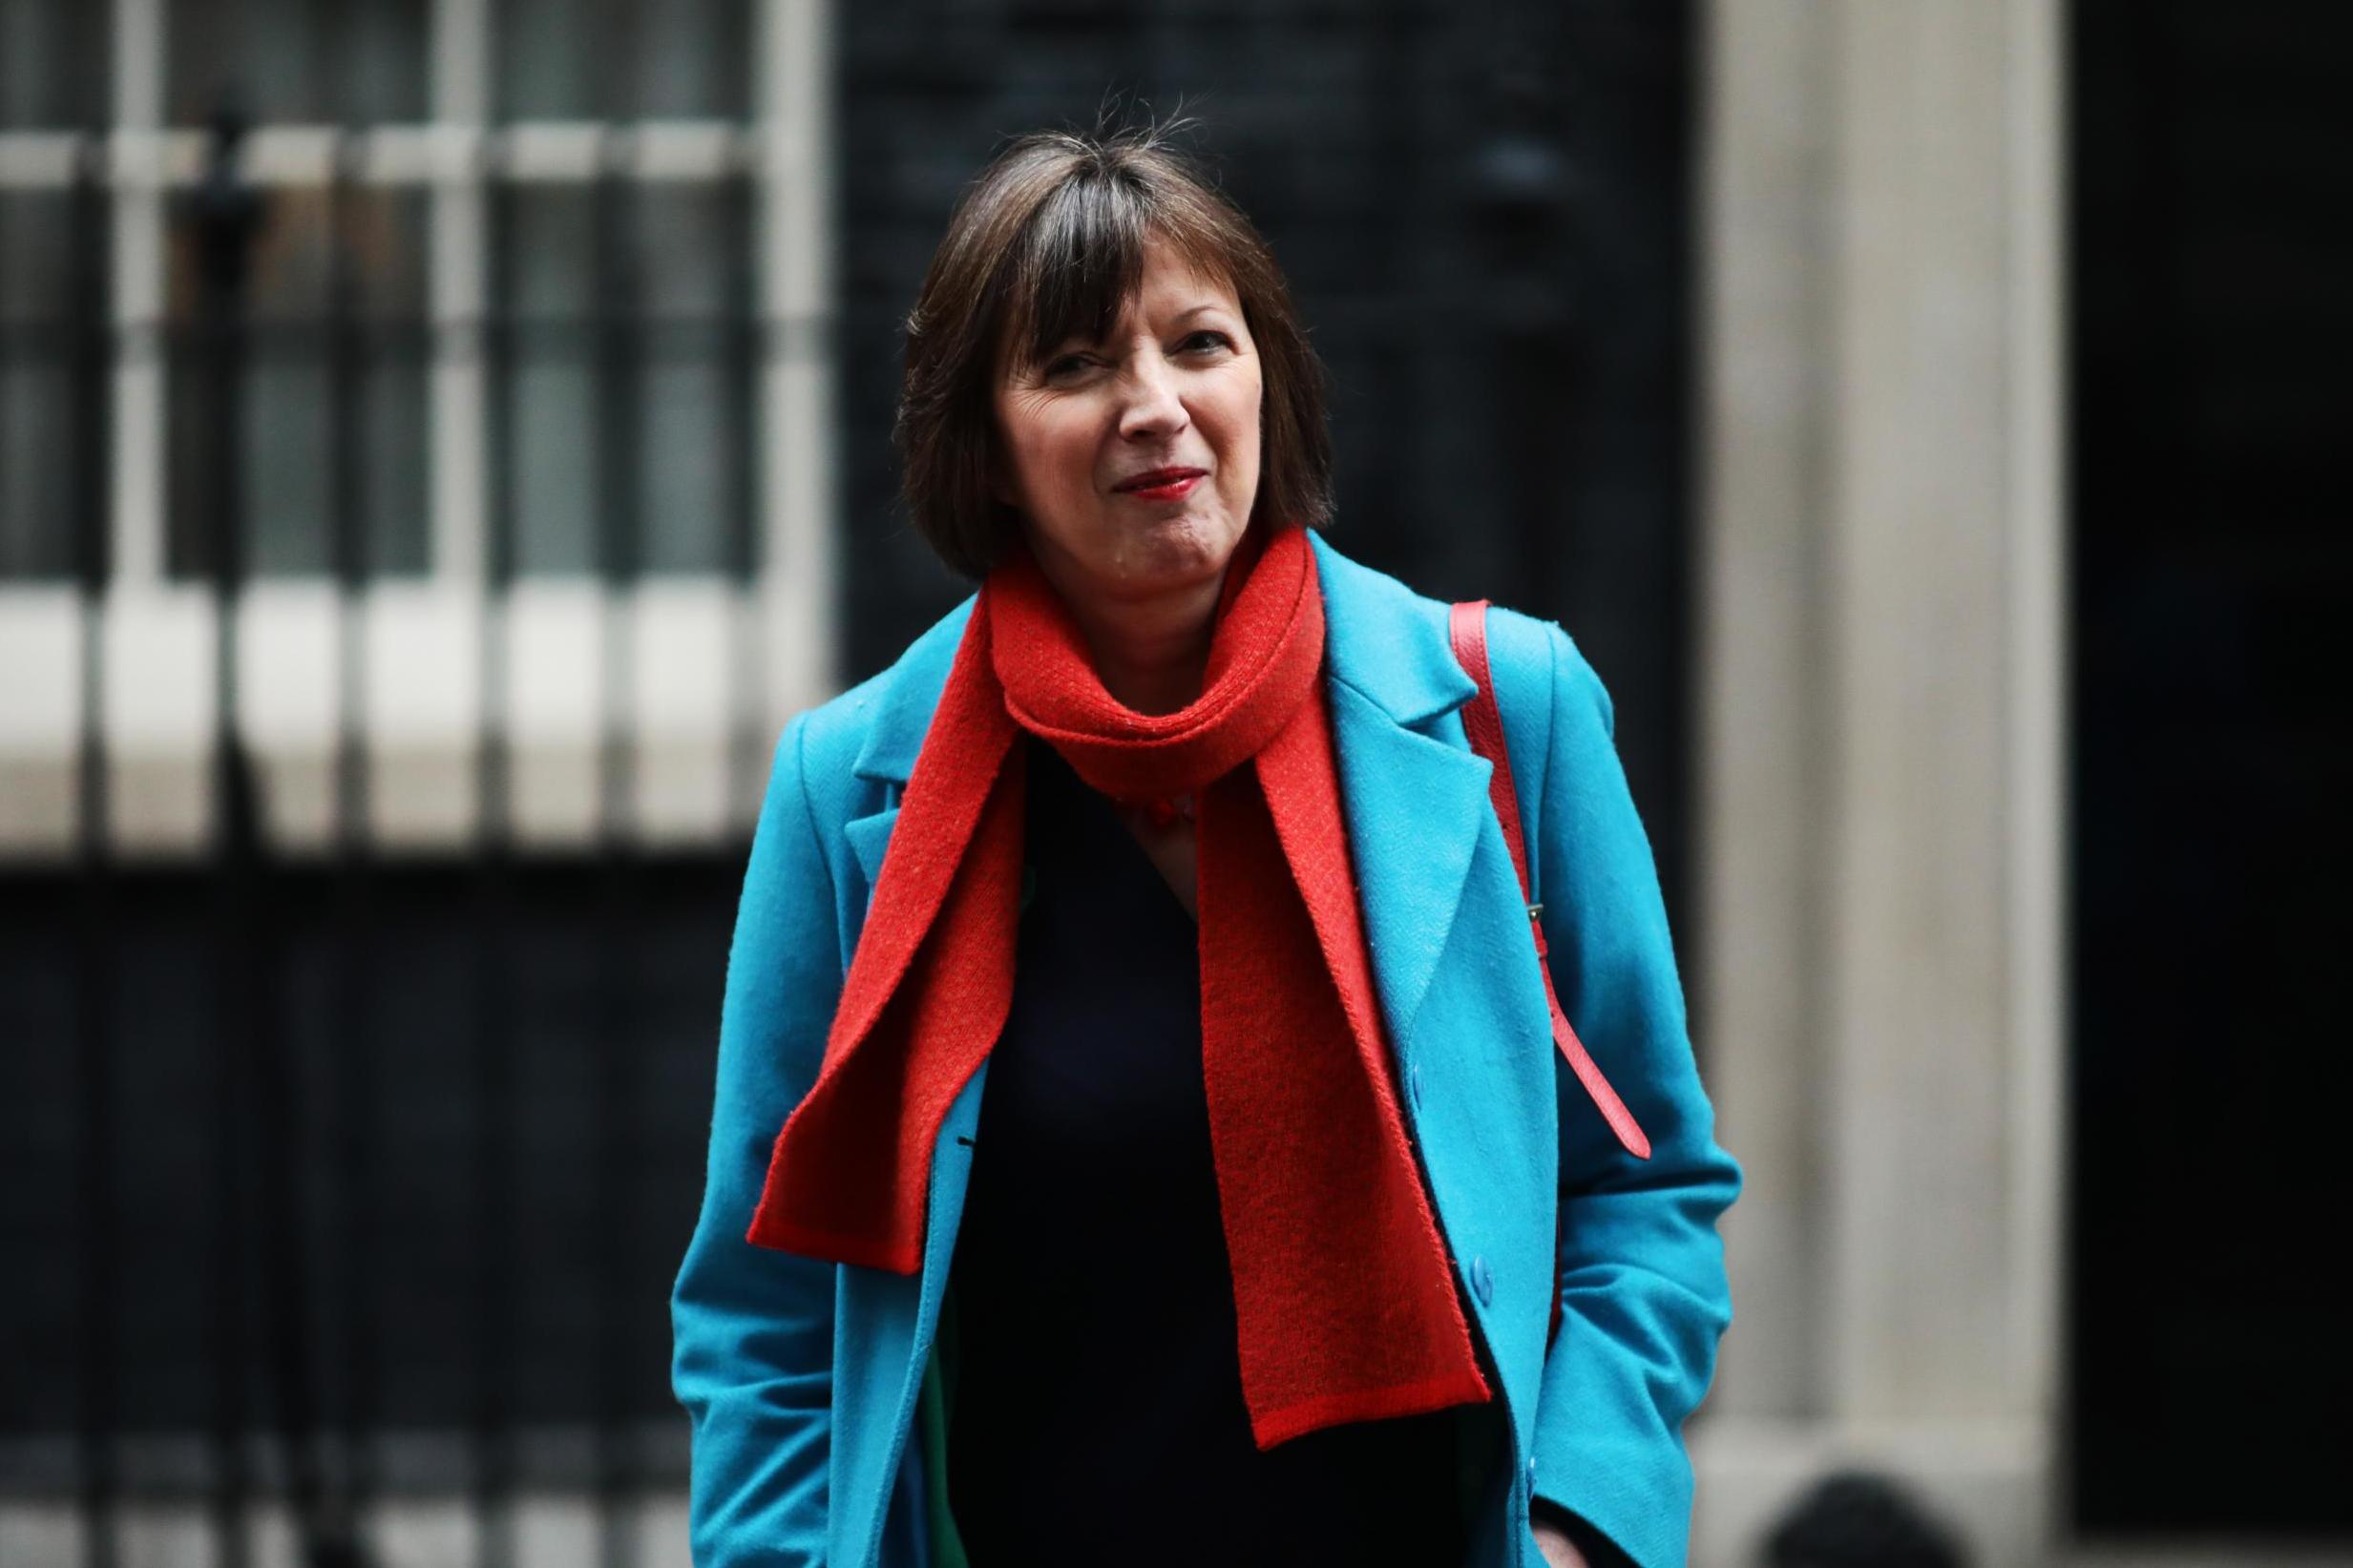 Frances O’Grady, general secretary of the Trades Union Congress, which claims it has been shut out of trade deal discussions